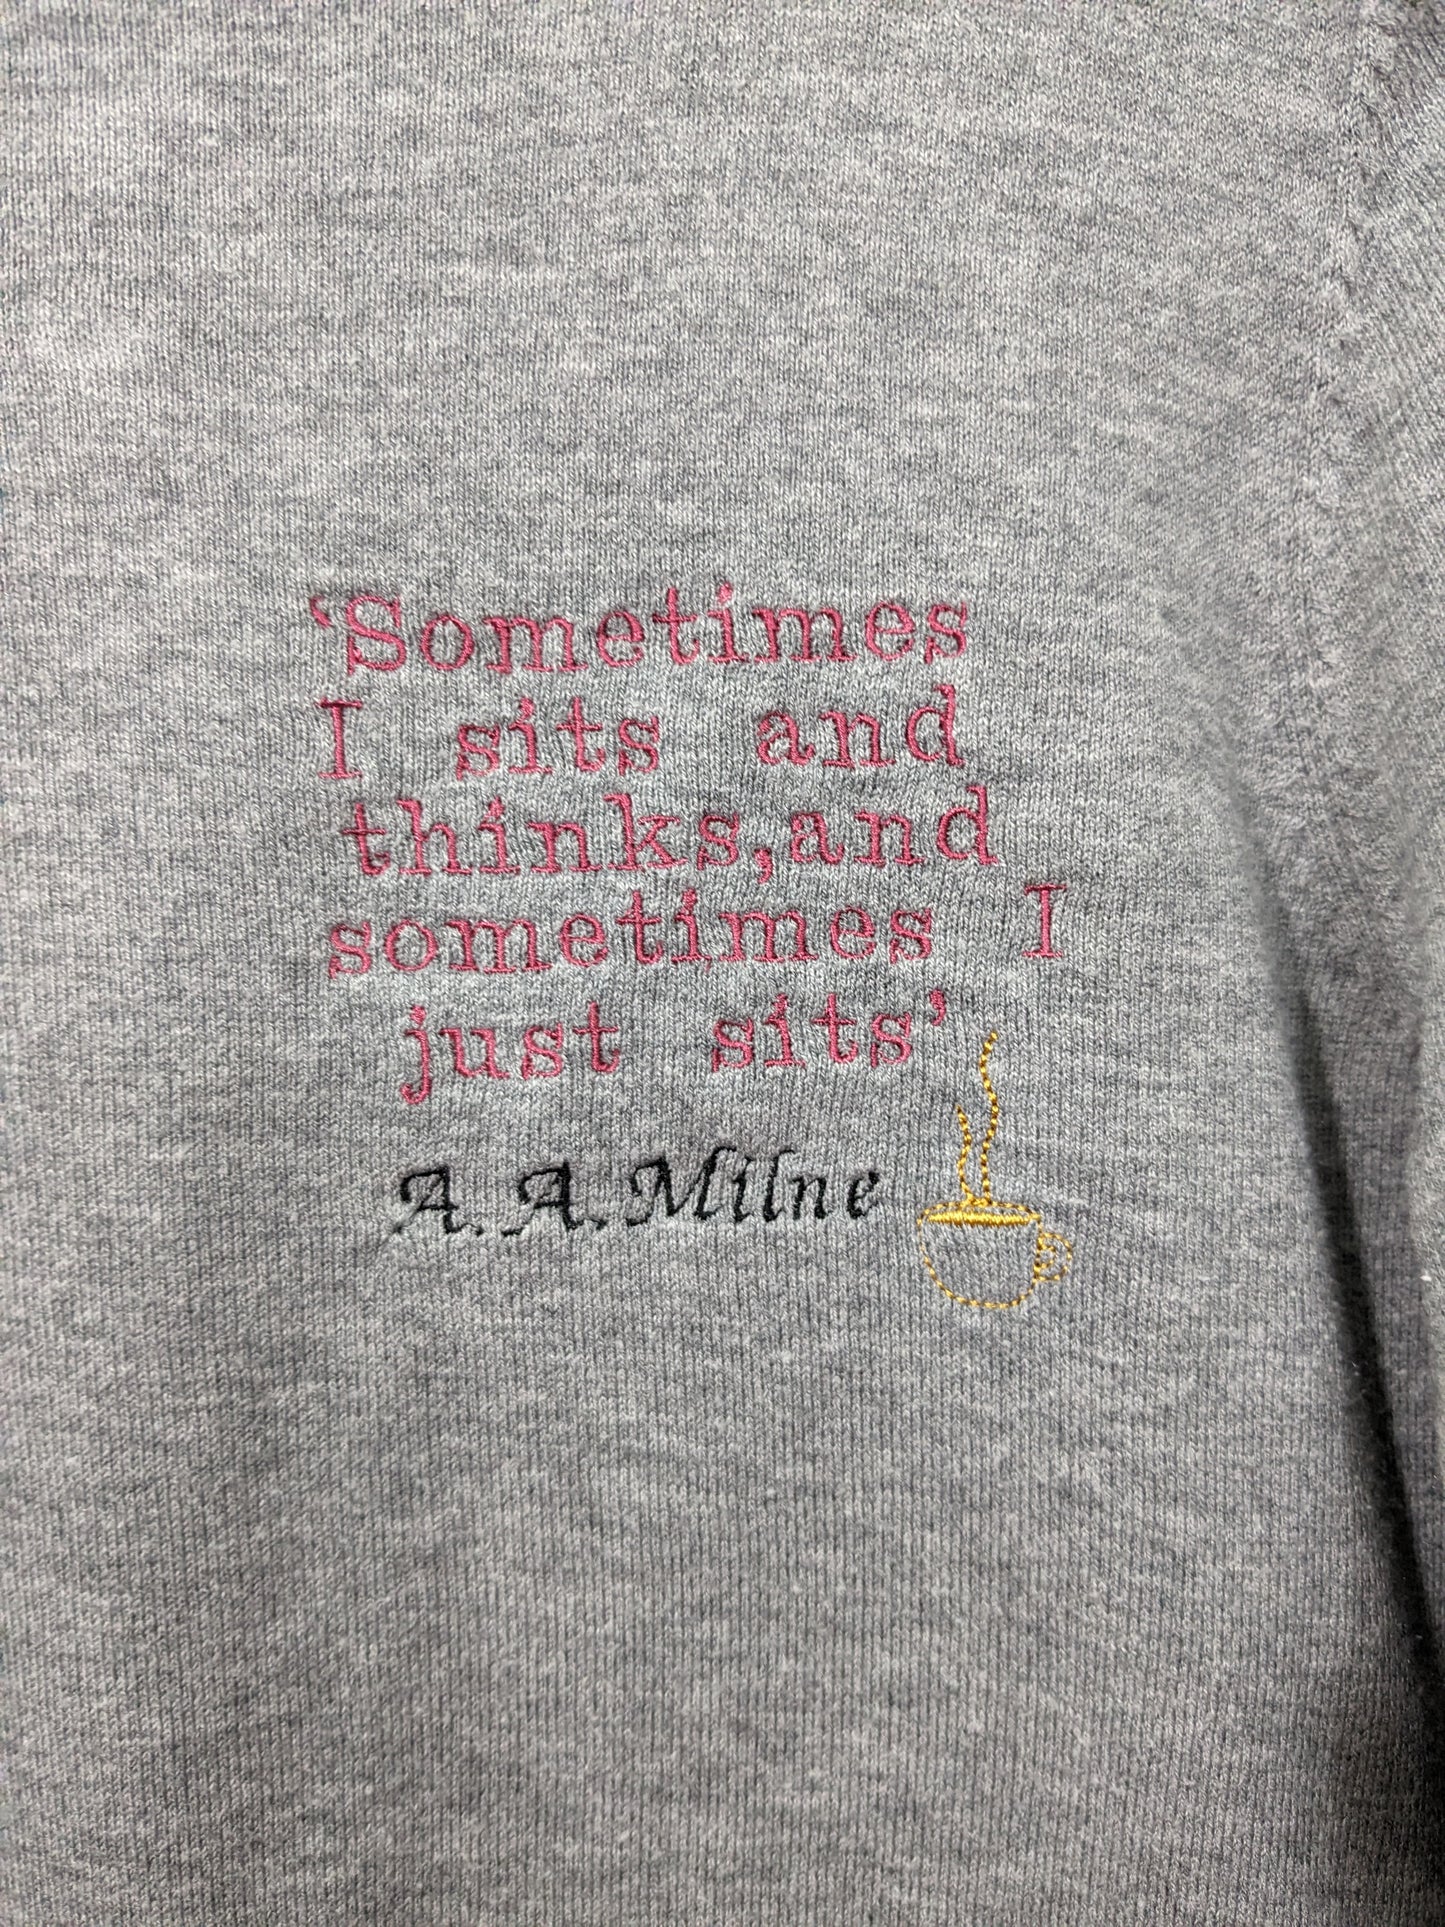 8-10 Upcycled Loungewear / Embroidered Pyjama Set - A. A. Milne - Winnie the Pooh Quote - Sustainable Comfy Clothes